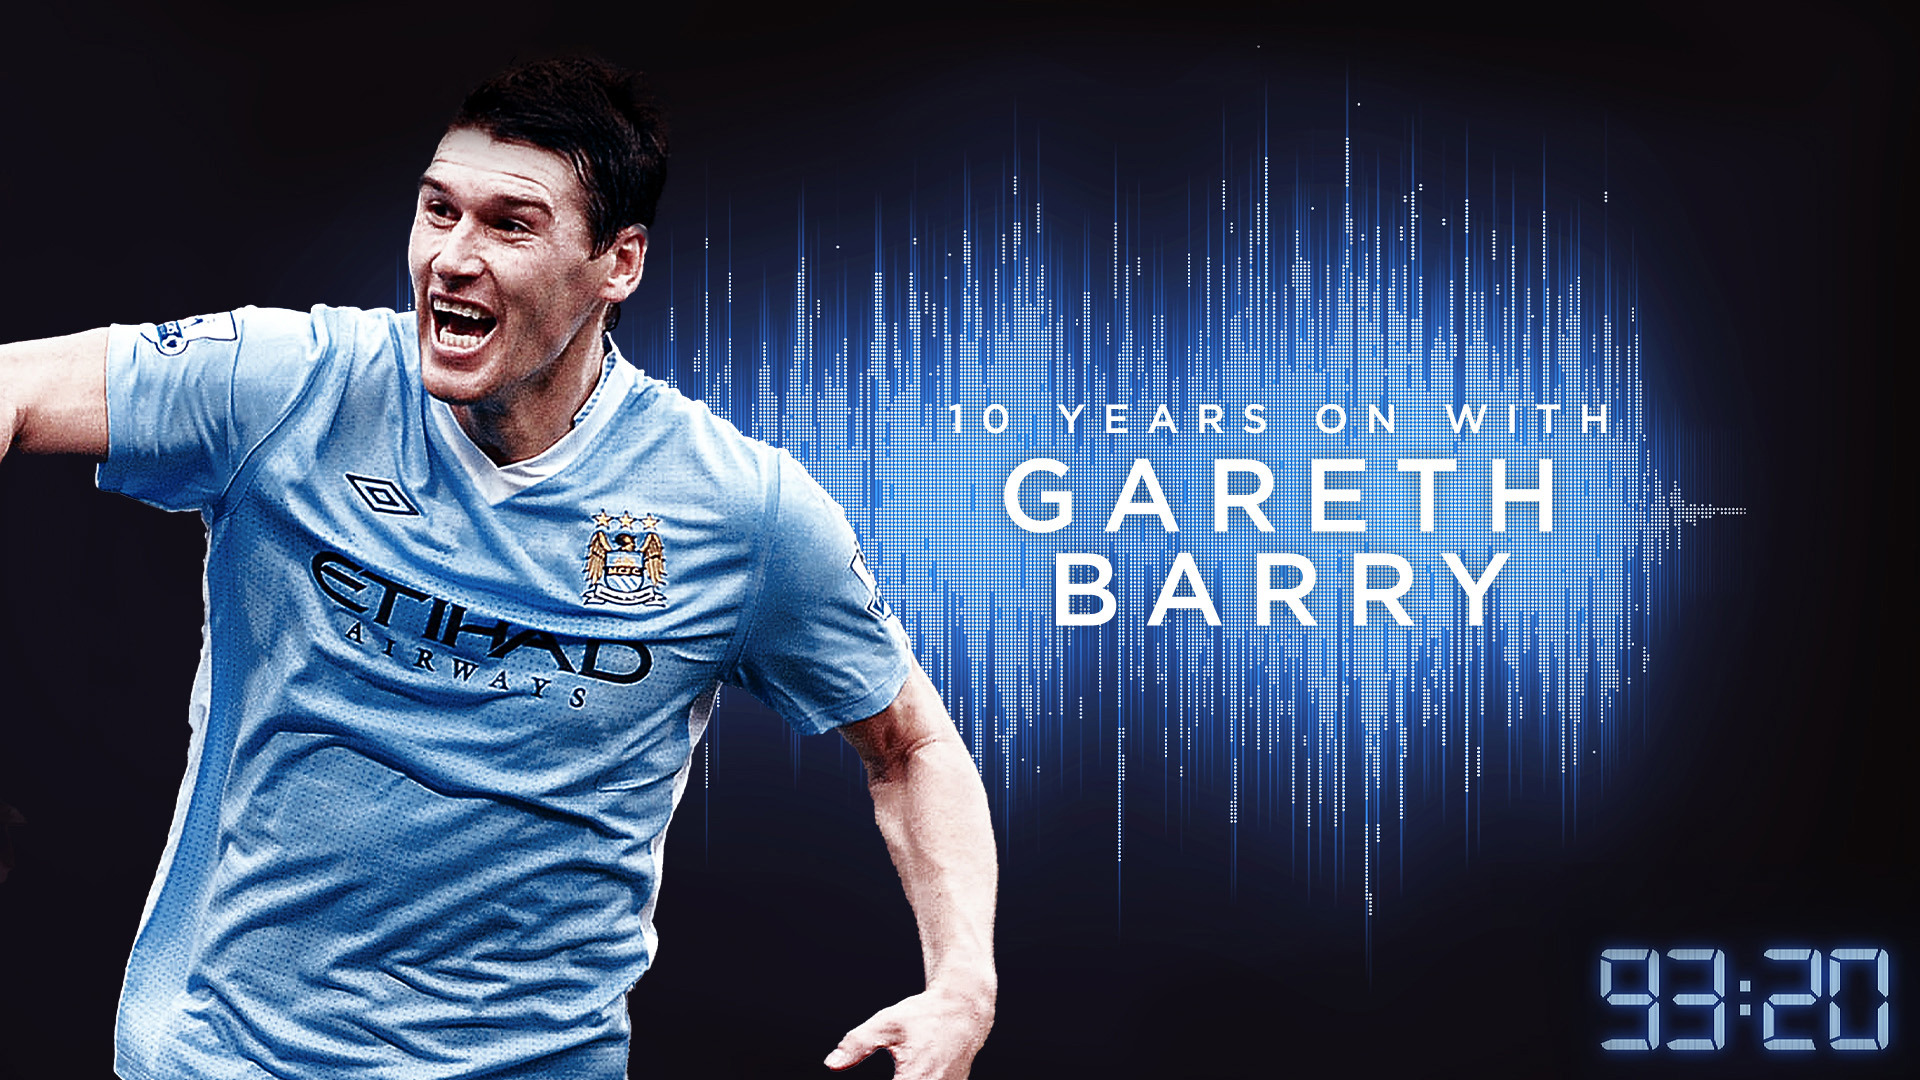 93:20 | Gareth Barry extended interview